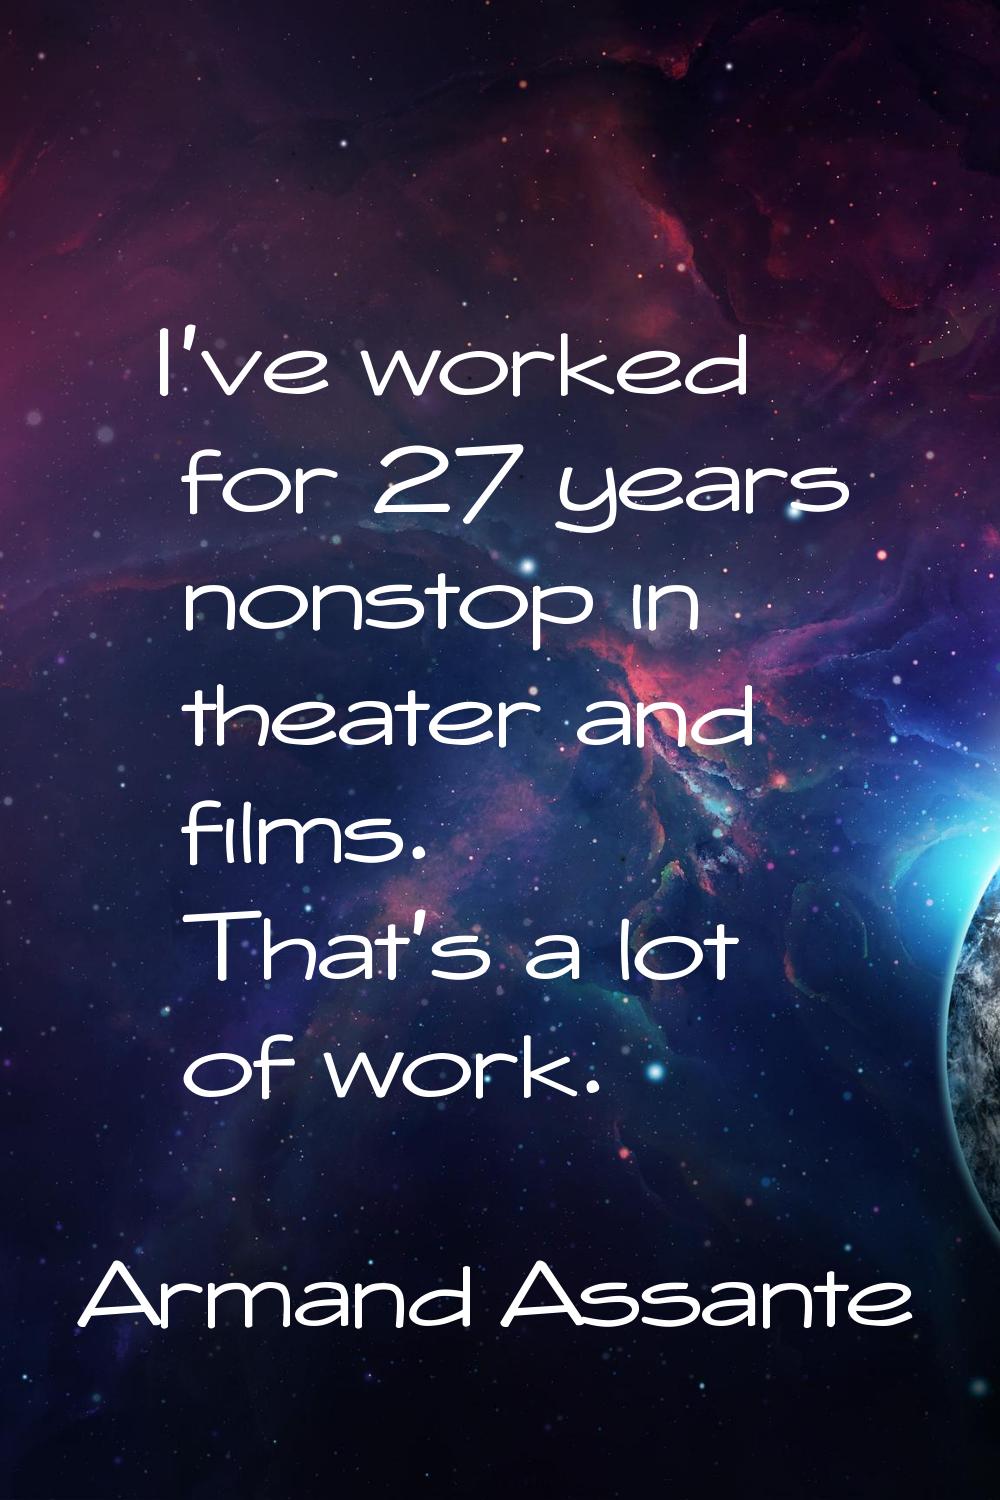 I've worked for 27 years nonstop in theater and films. That's a lot of work.